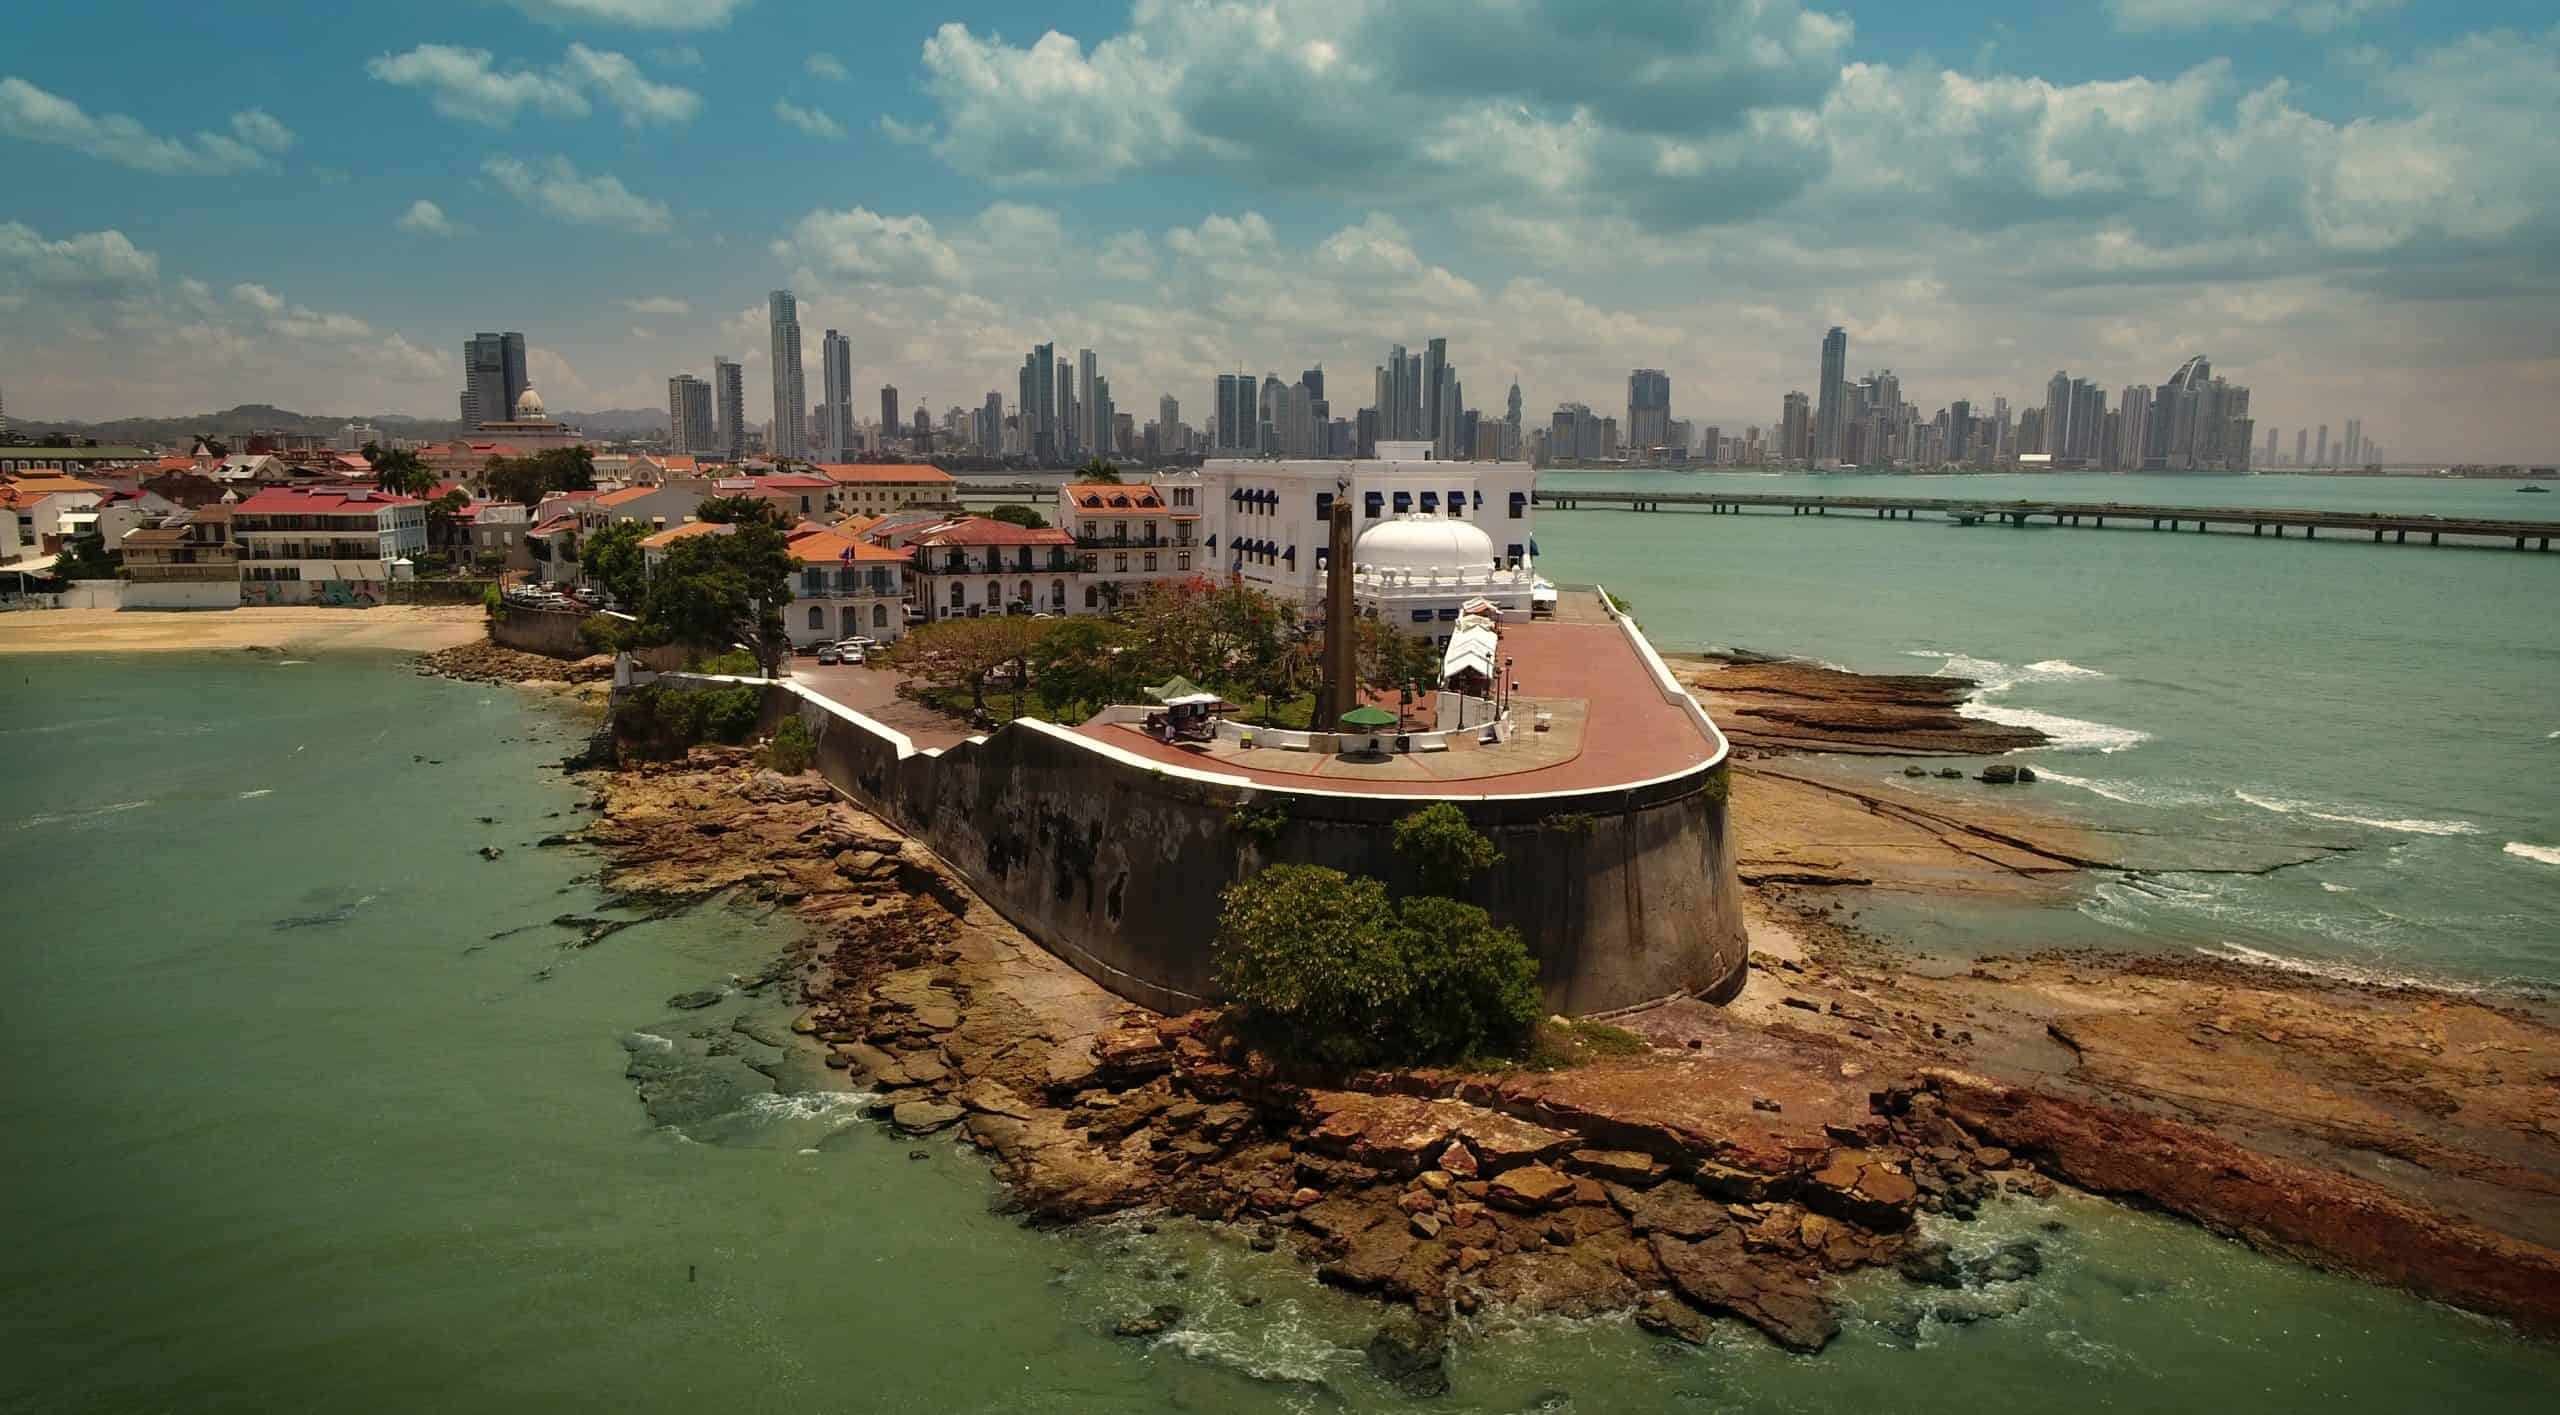 The best places to visit in Panama: Explore them on our Highlights Tour